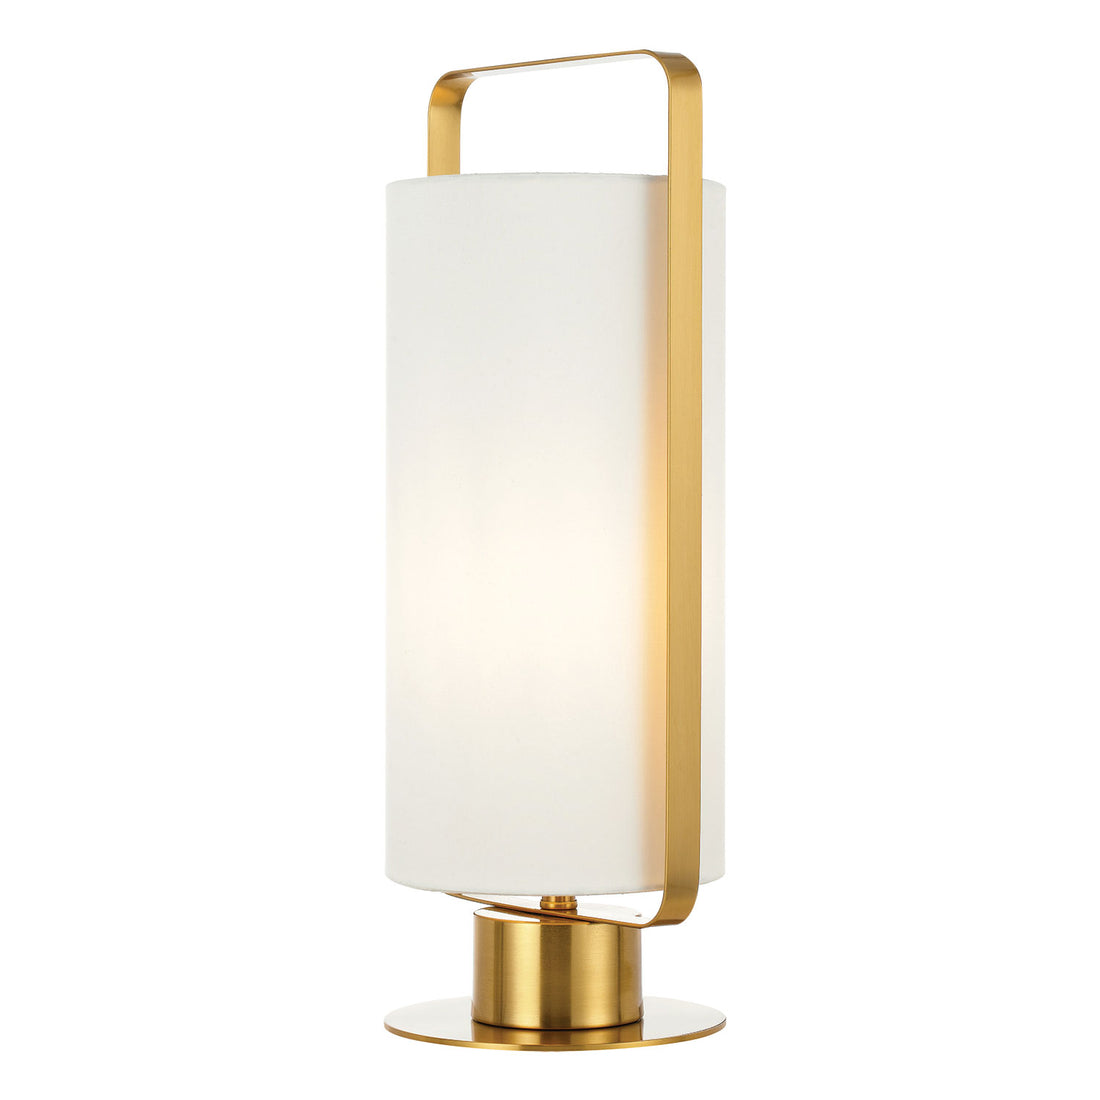 Orwel Ivory and Antique Gold Modern Table Lamp